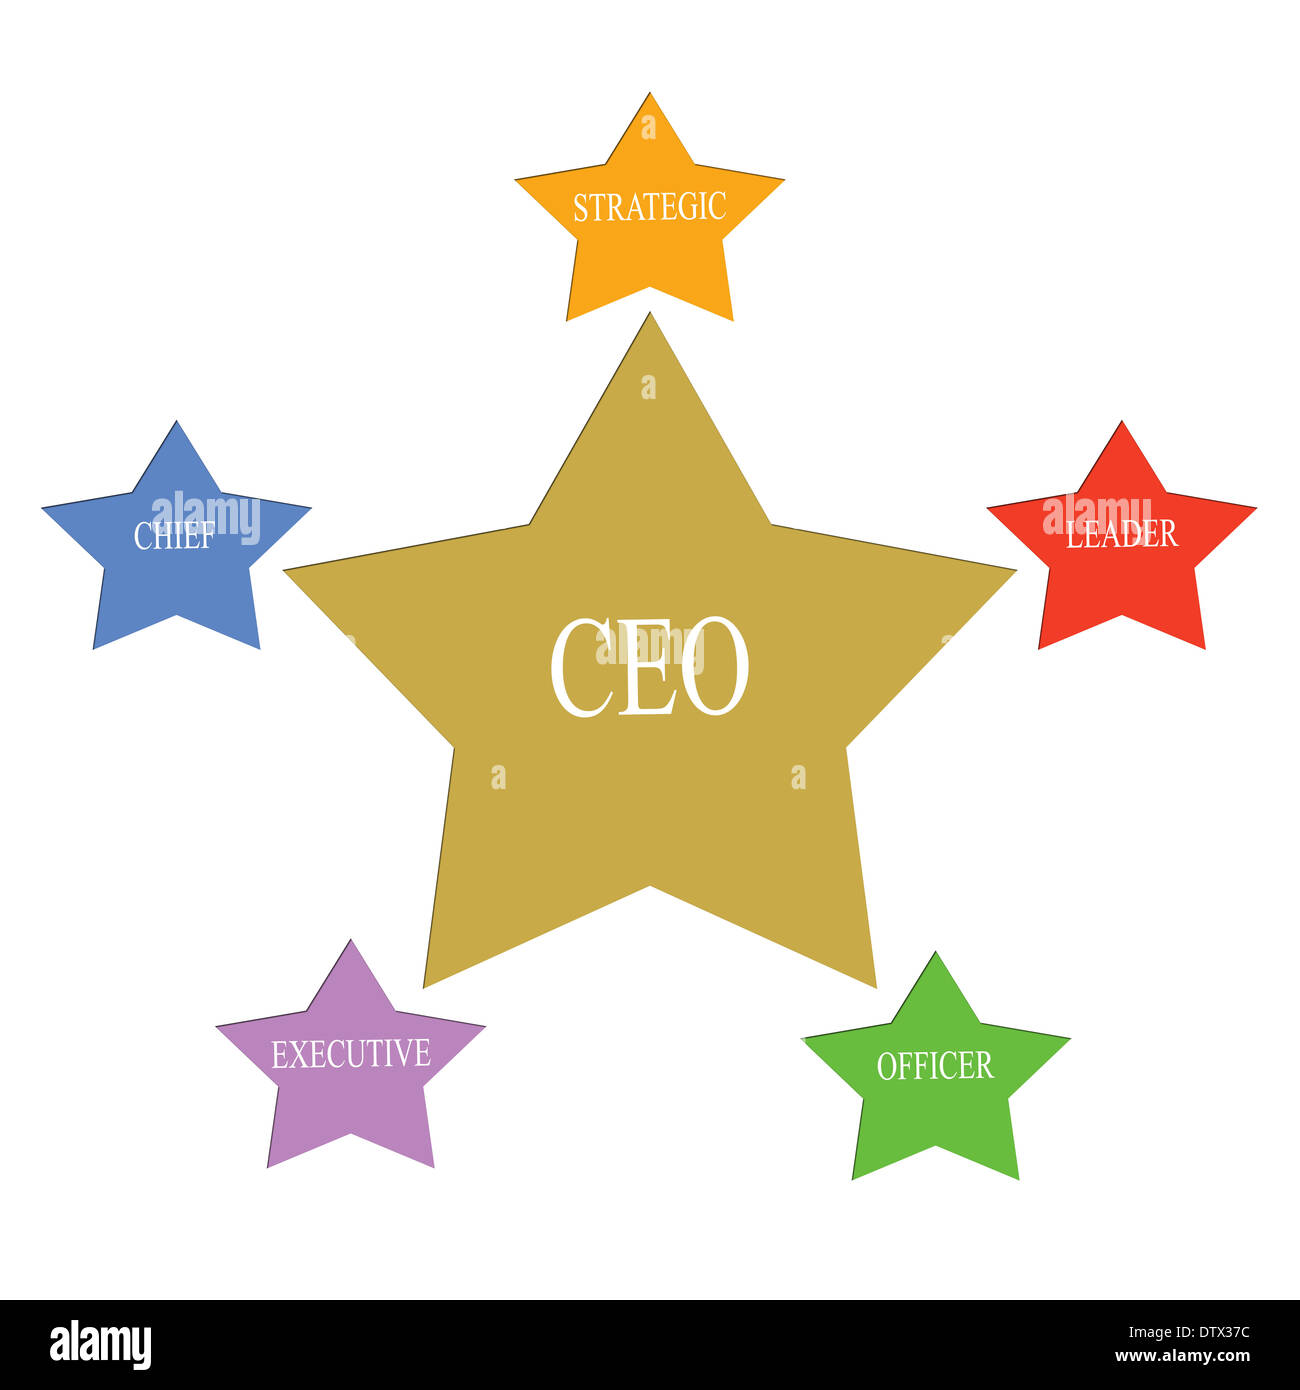 CEO Word Stars Concept with great terms such as leader, chief and more. Stock Photo